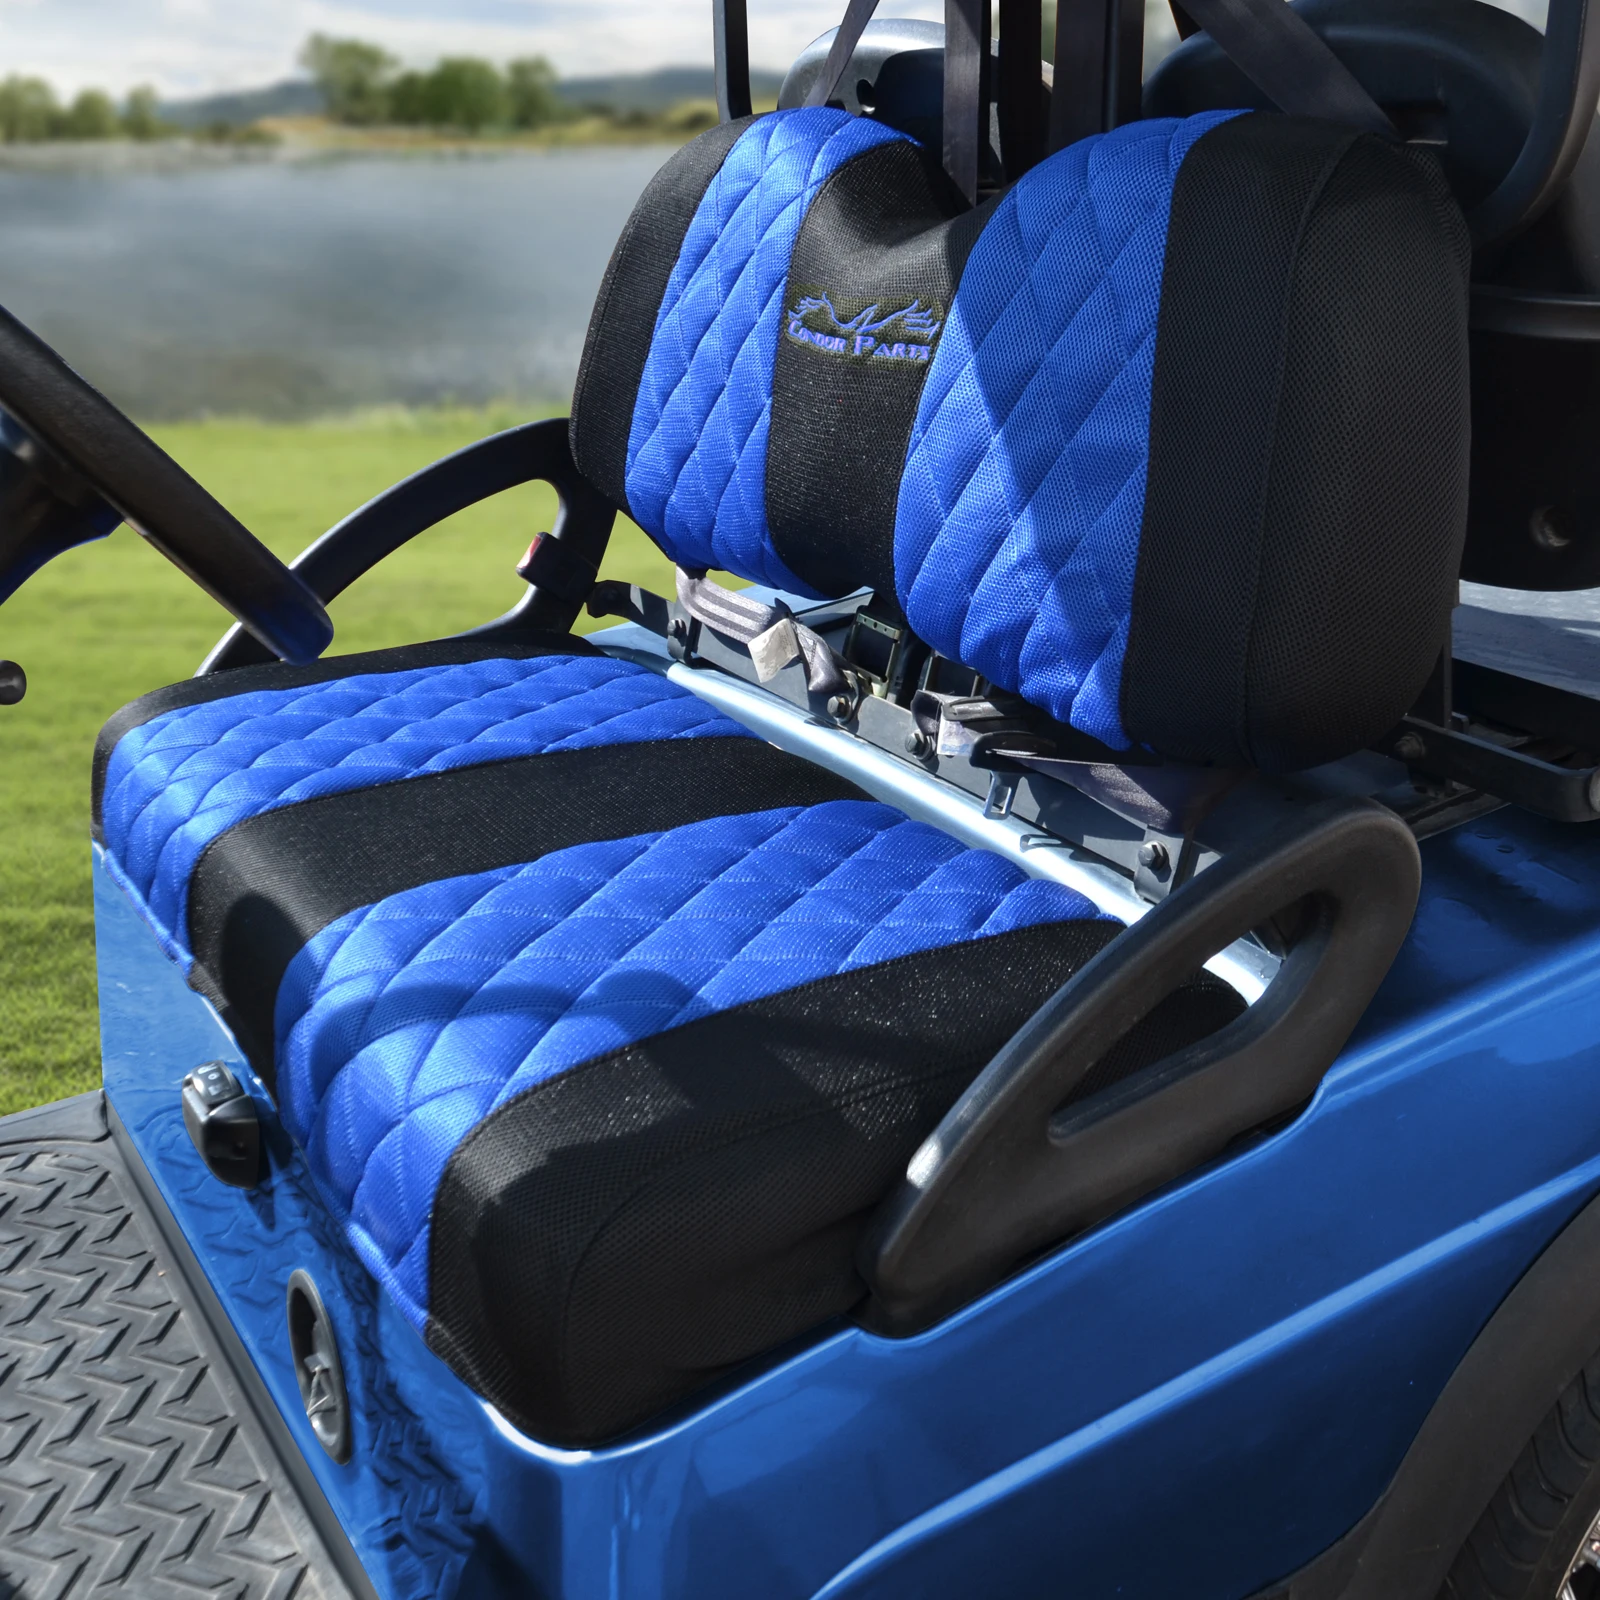 

Brand New Golf Cart Seat Covers Fit To Club Car Precedent,DS and Yamaha,Breathable Washable Polyester Mesh Cloth.Renew Golf Cart